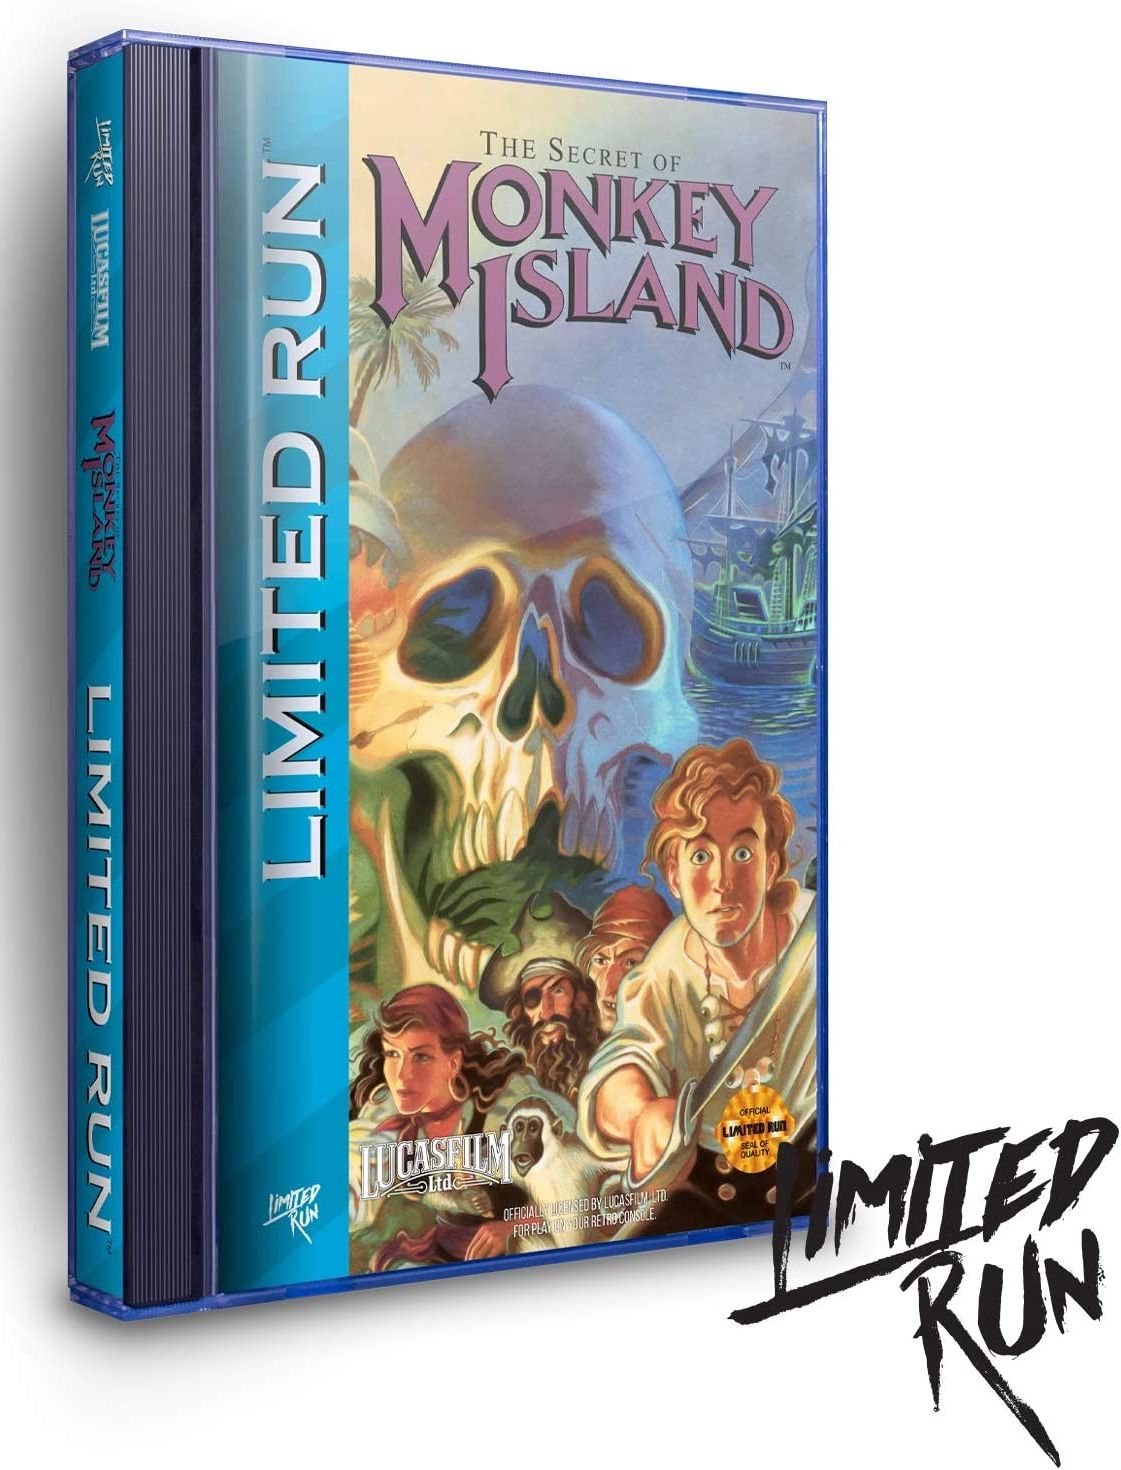 The Secret of Monkey Island [Limited Run] Video Game